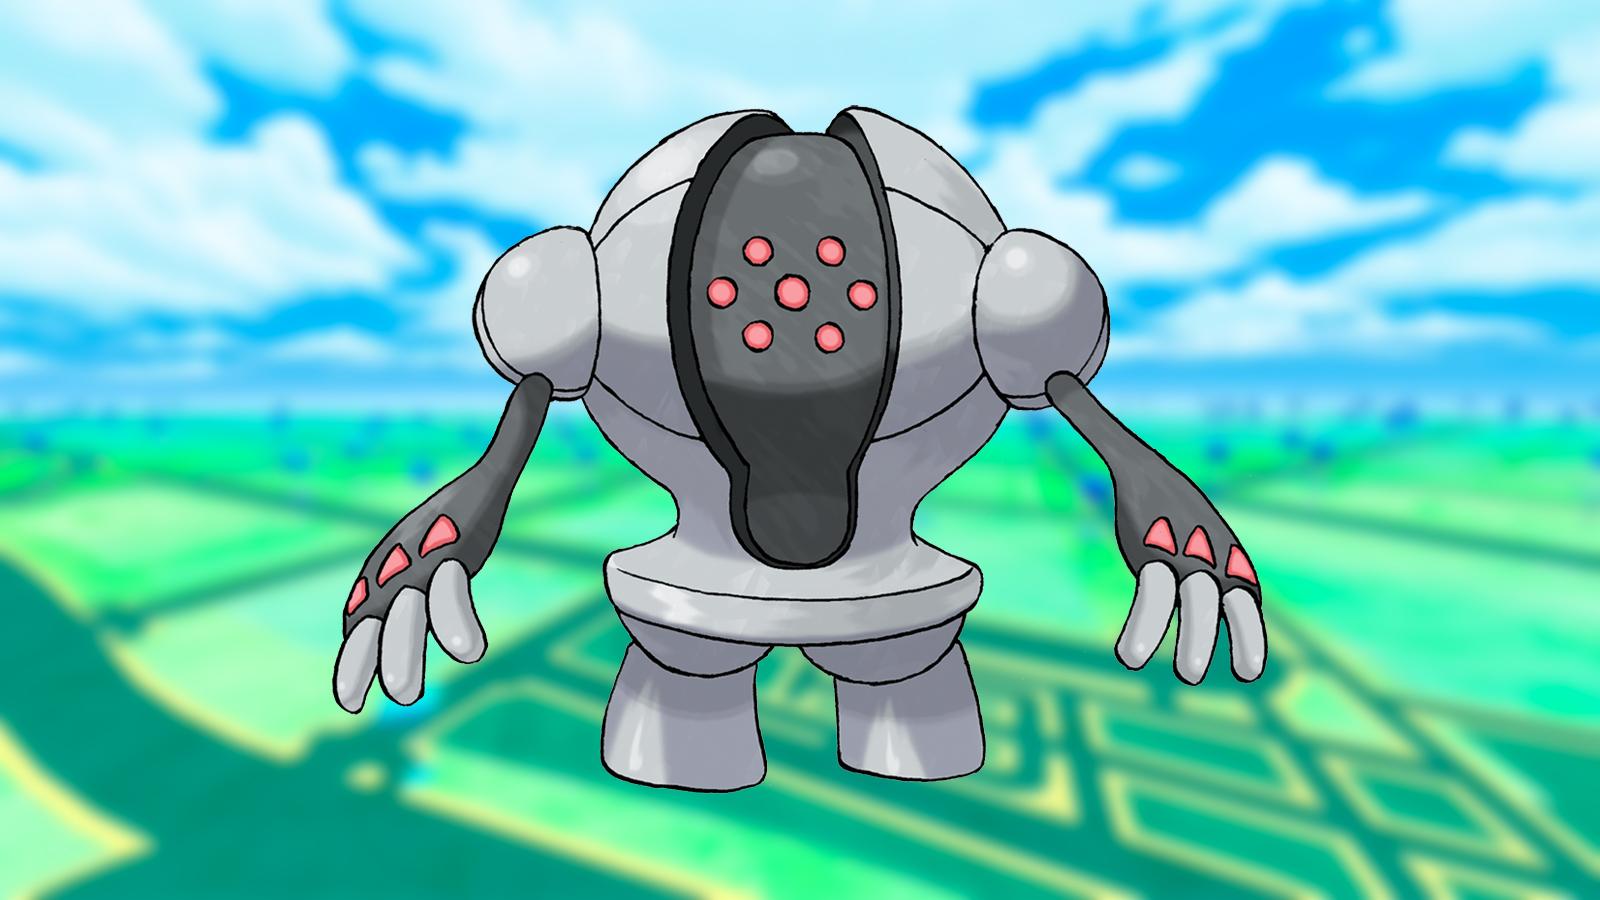 An image of Registeel on a Pokemon Go background